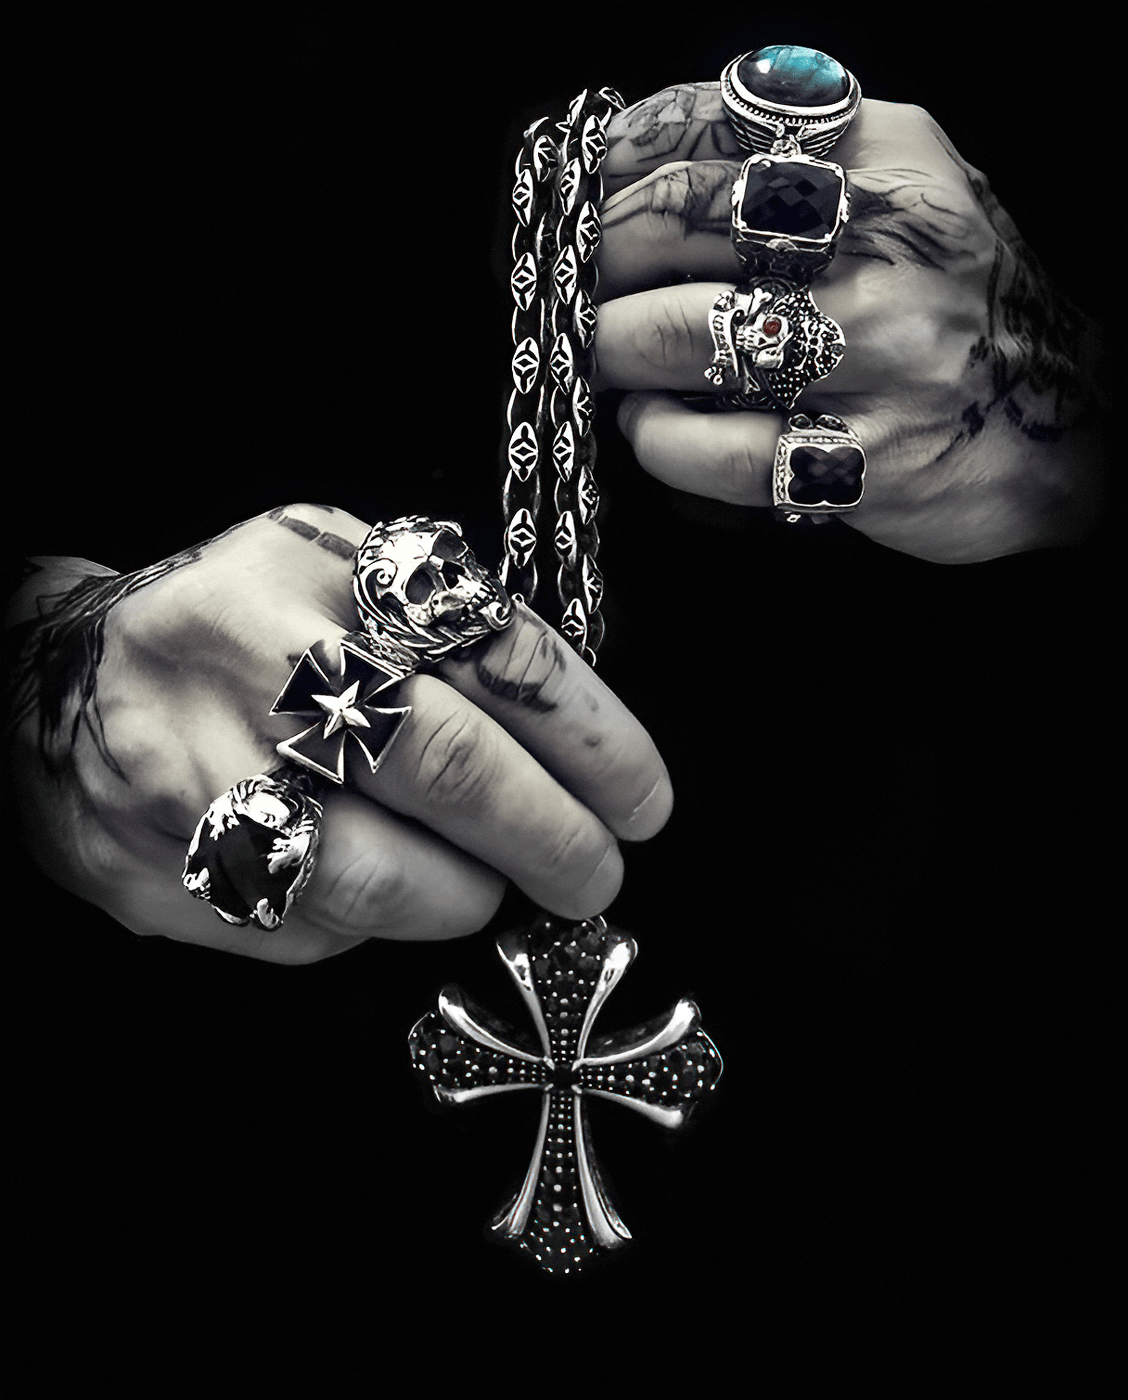 Close-up of hands with ornate rings holding a cross pendant.